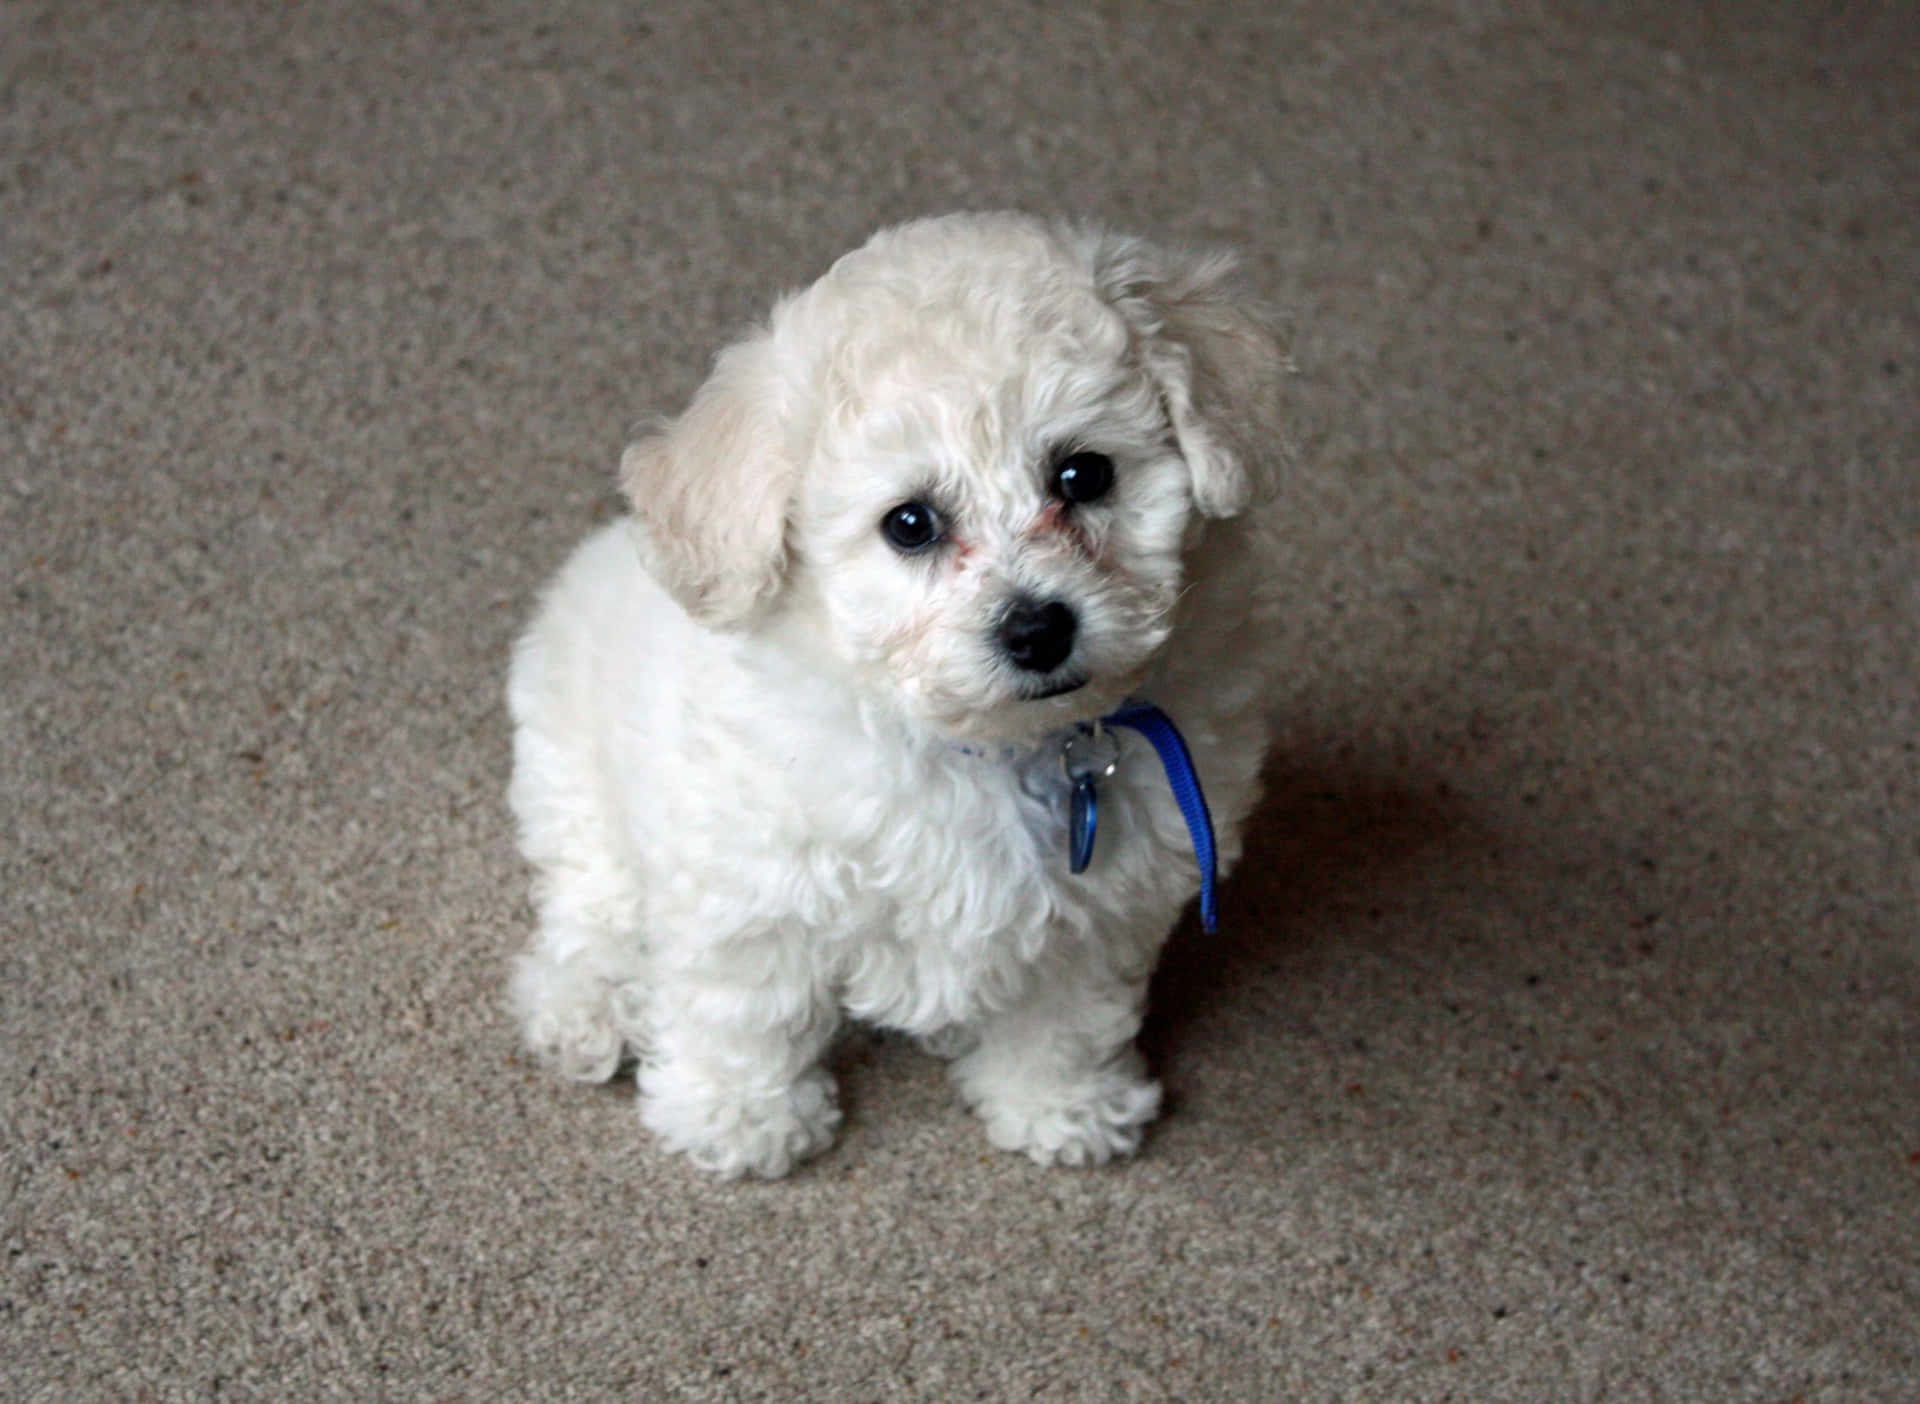 A fluffy white Bichon Frise looking into the camera with its big, expressive eyes.